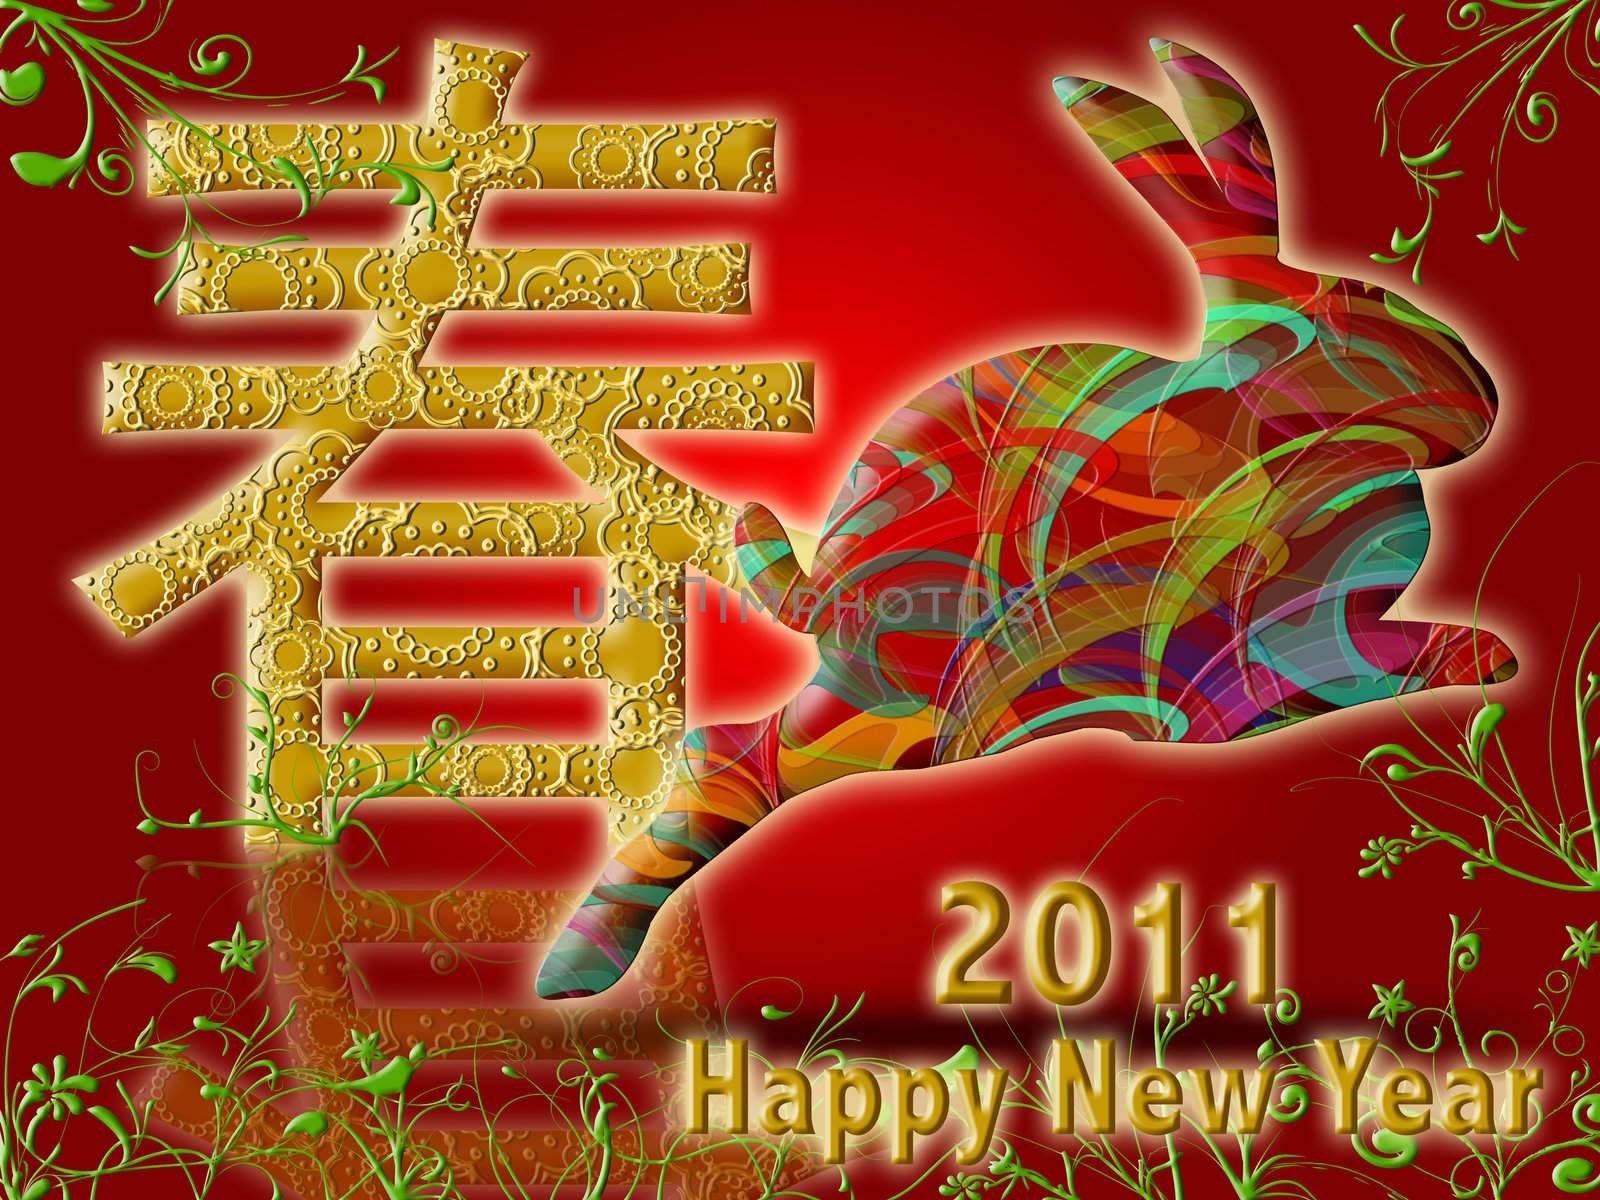 Happy Chinese New Year 2011 with Colorful Rabbit and Spring Symb by Davidgn